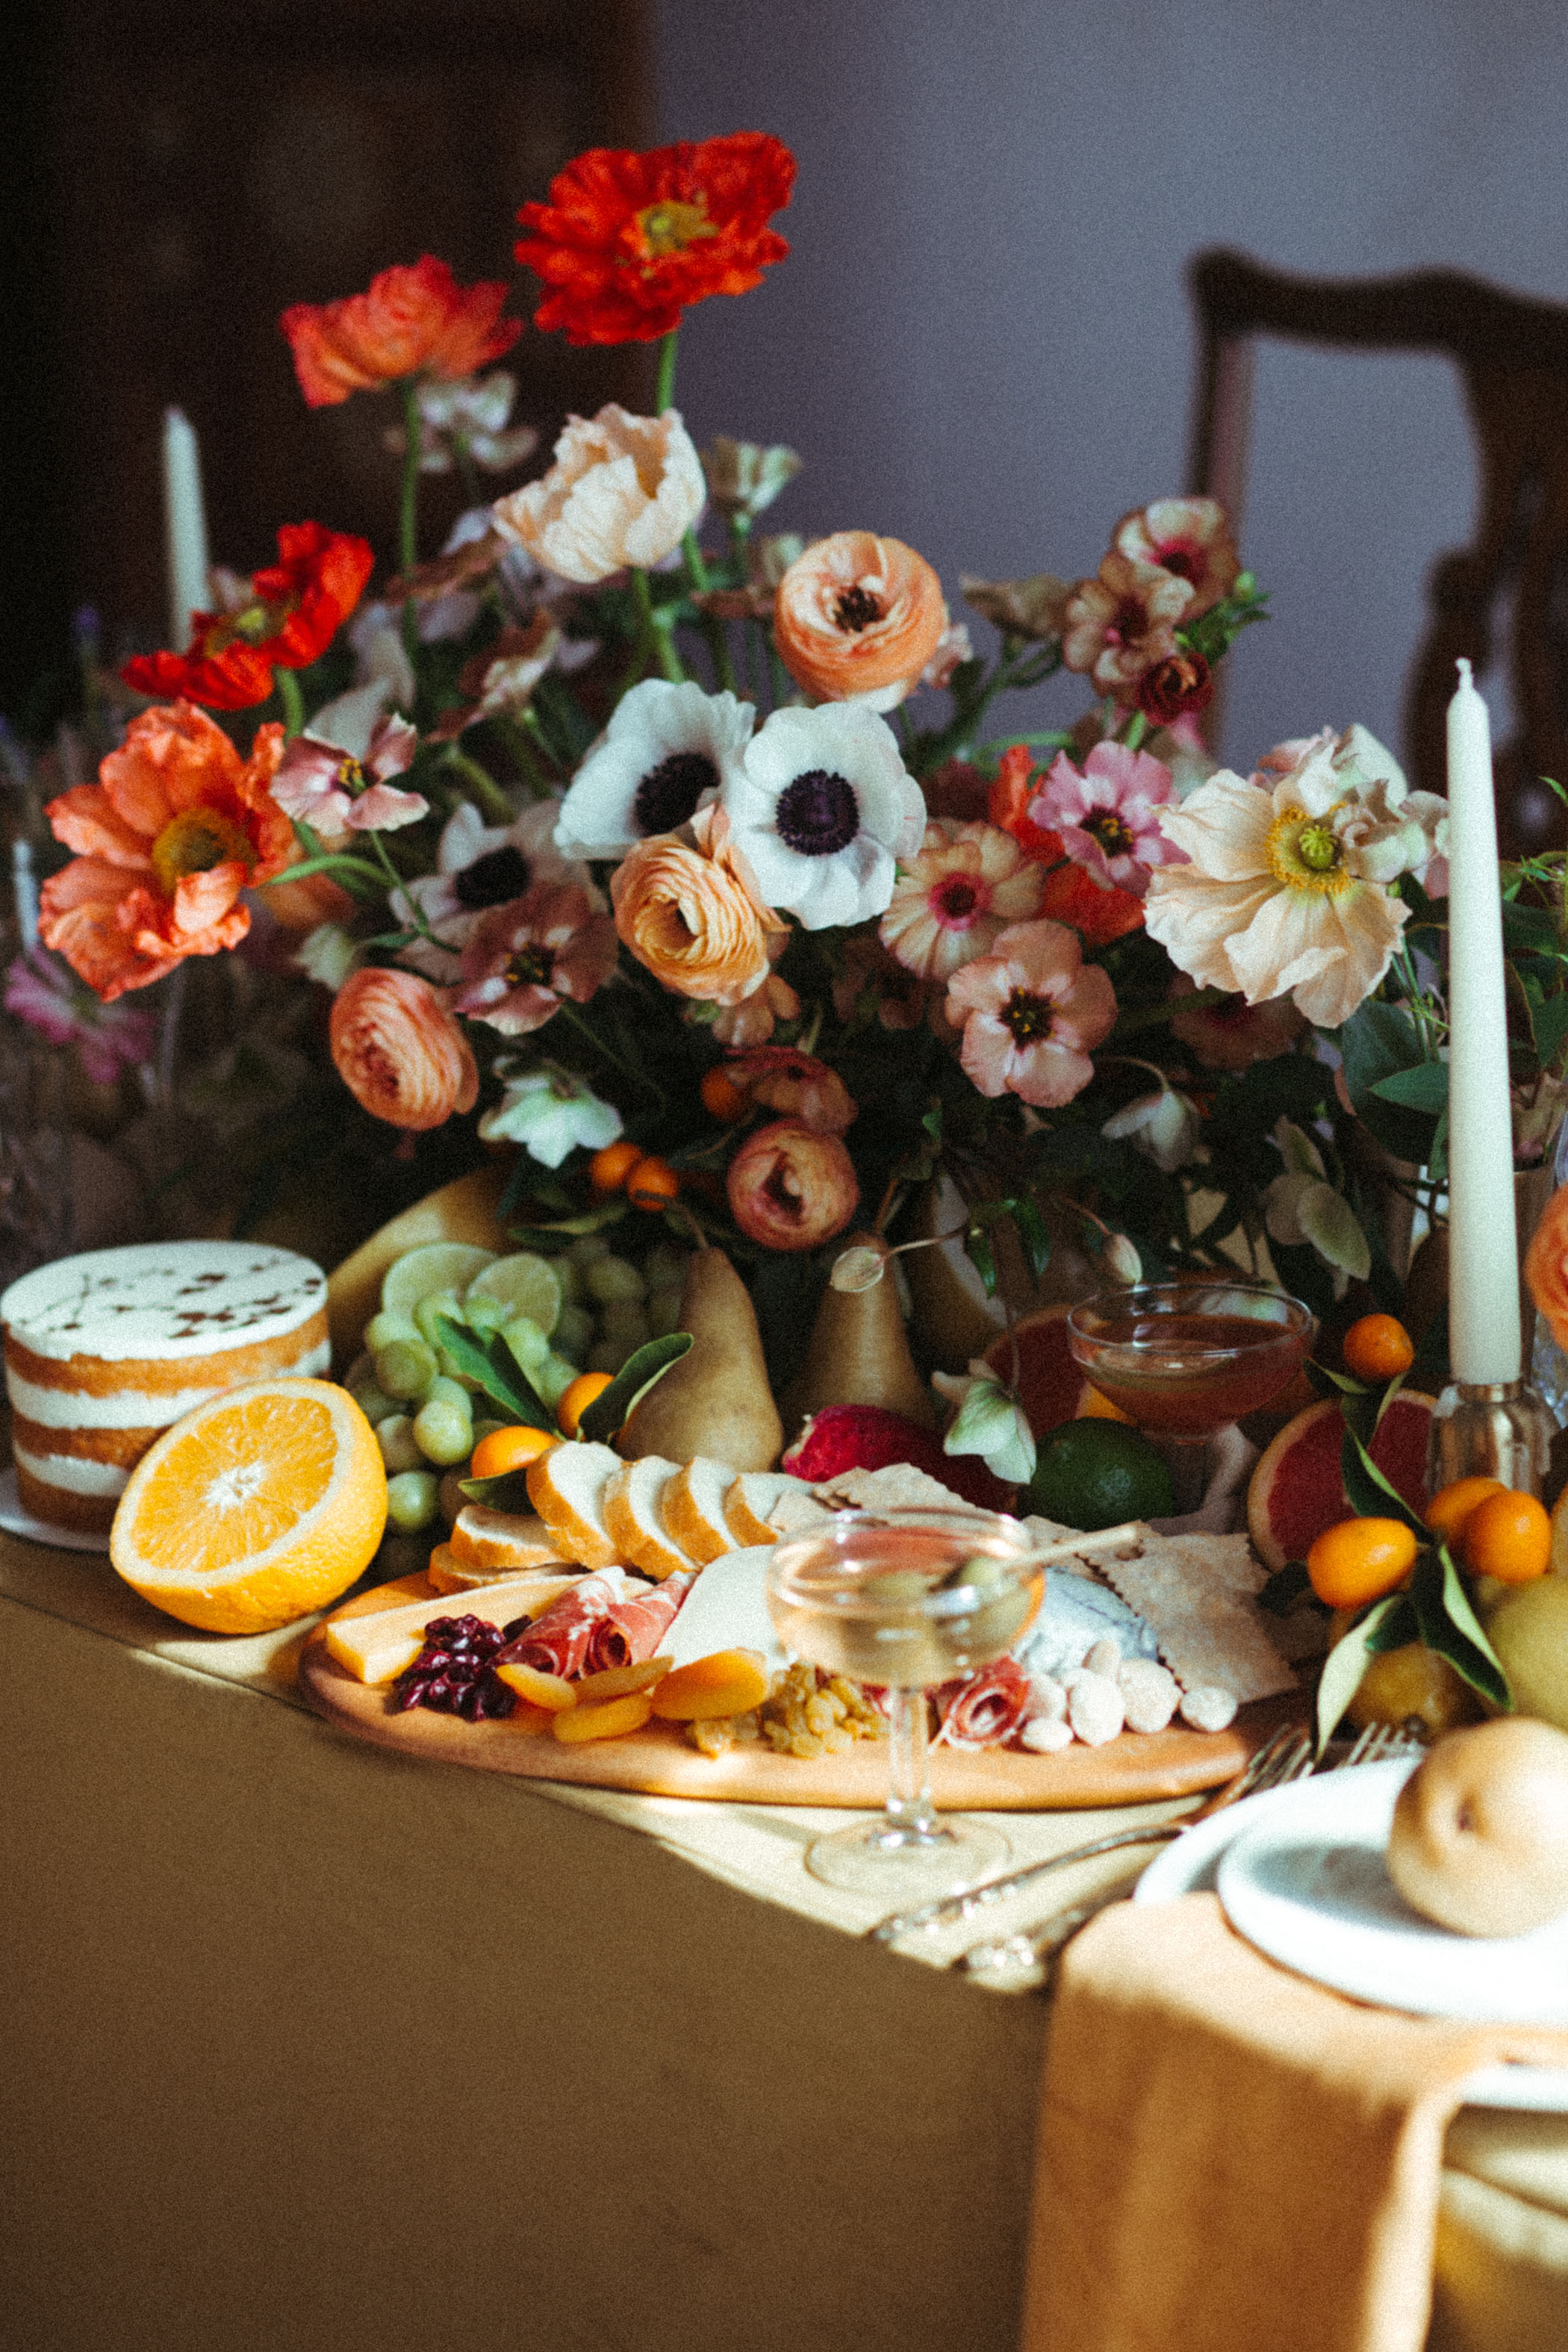 Renaissance Painting Inspired Styled Shoot